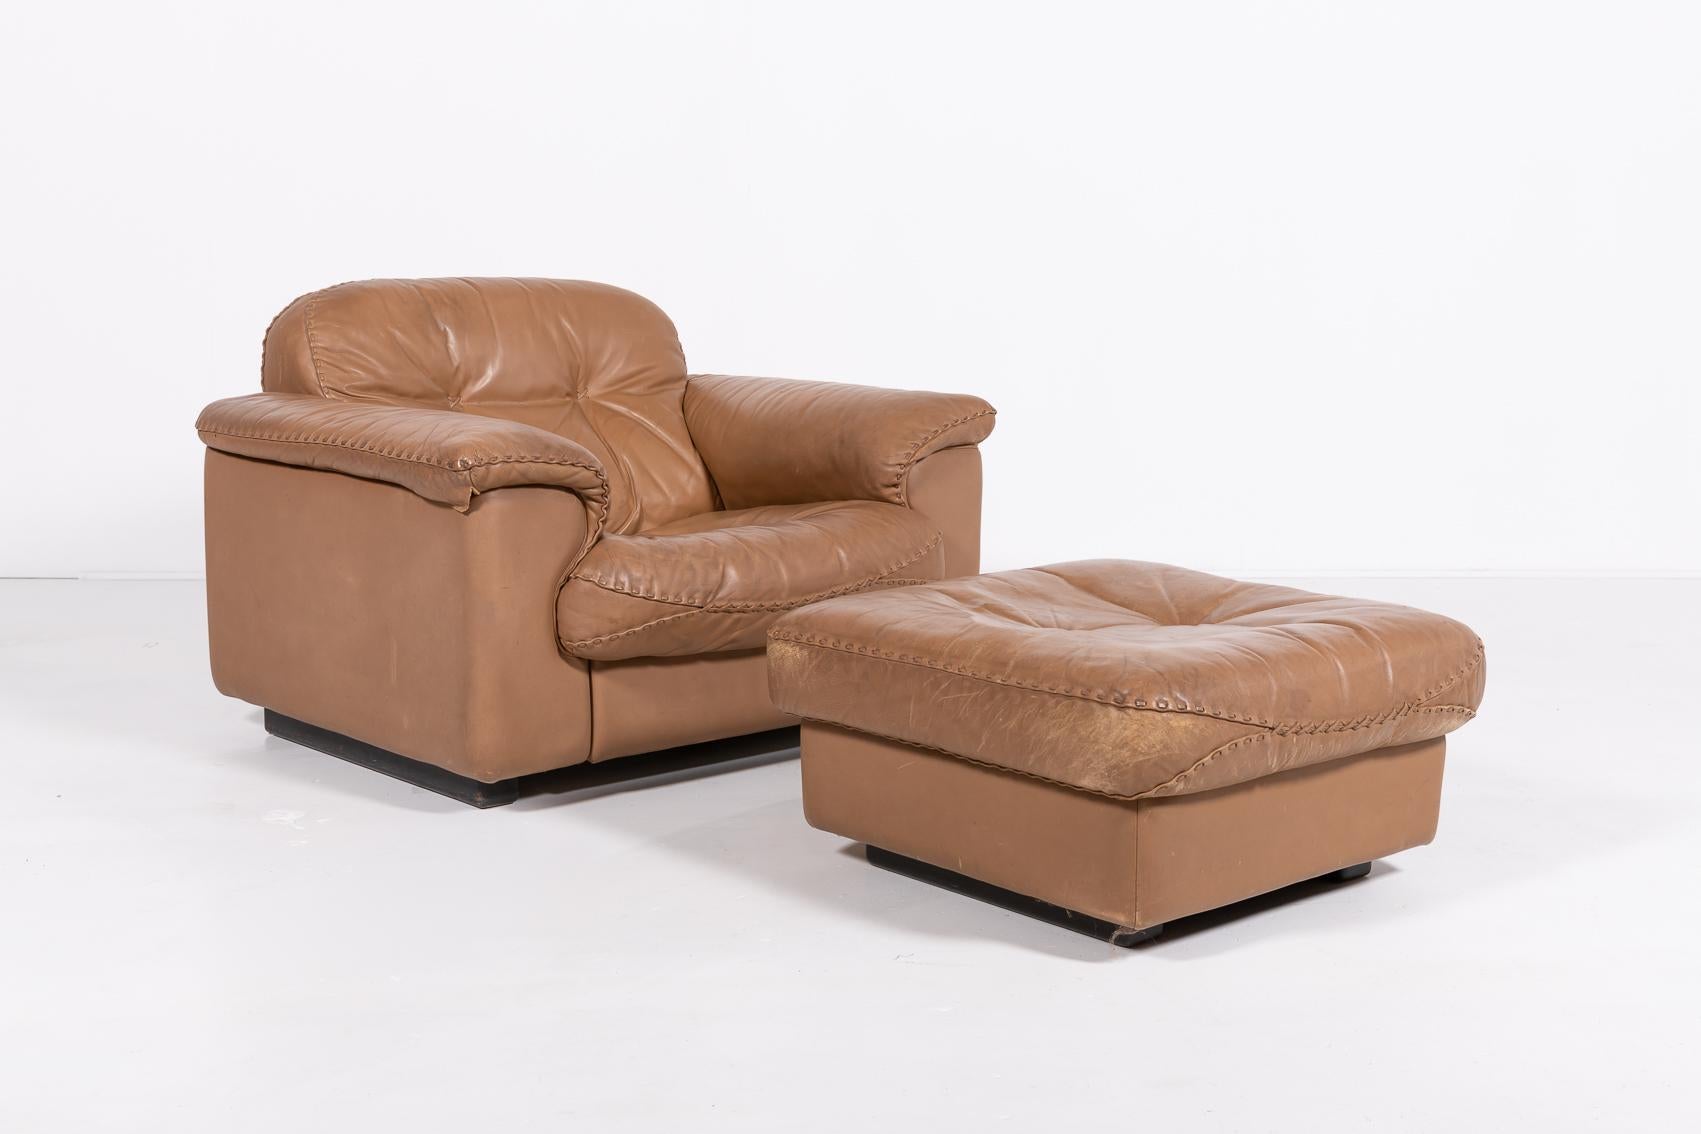 Pair of De Sede DS-101 patinated brown leather armchairs with pouf. Excellent comfort with an extendable seat for lounge sitting. The frame is made of solid wood and the leather has hand-stitched seams, produced in Switzerland. The seat depth can be